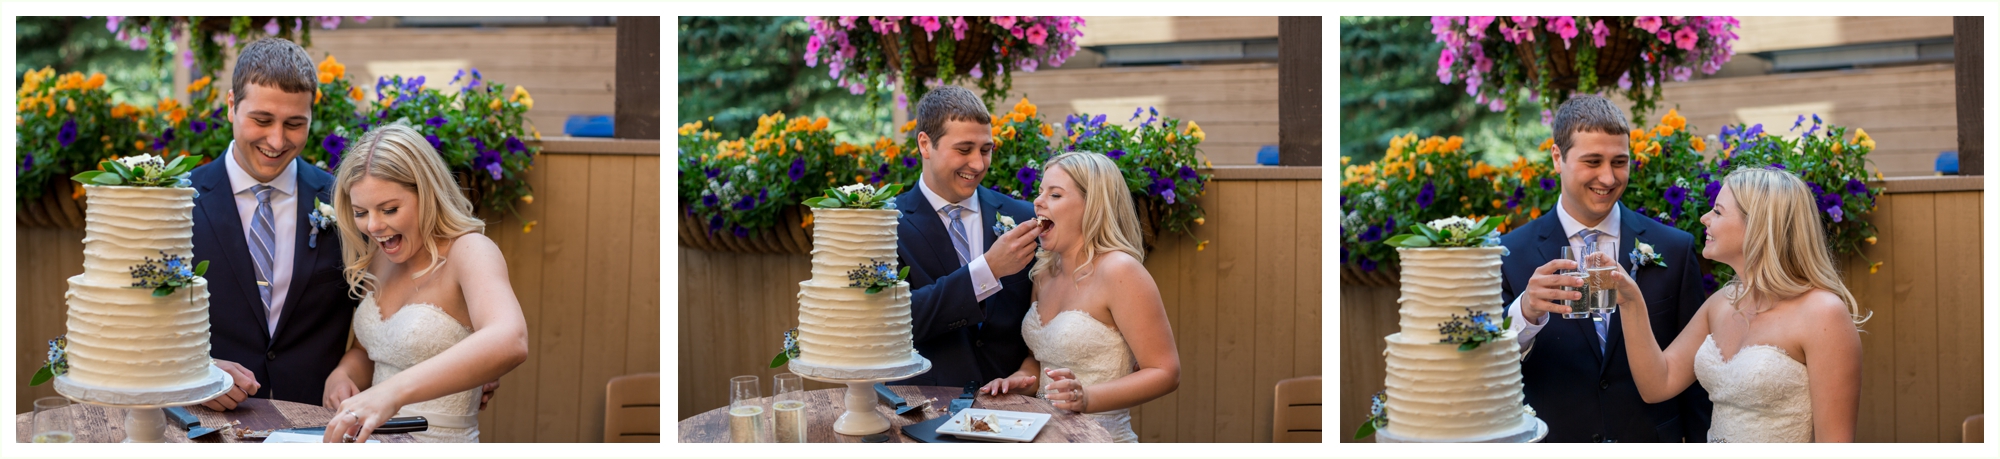 bride and groom cut and eat wedding cake in breckenridge